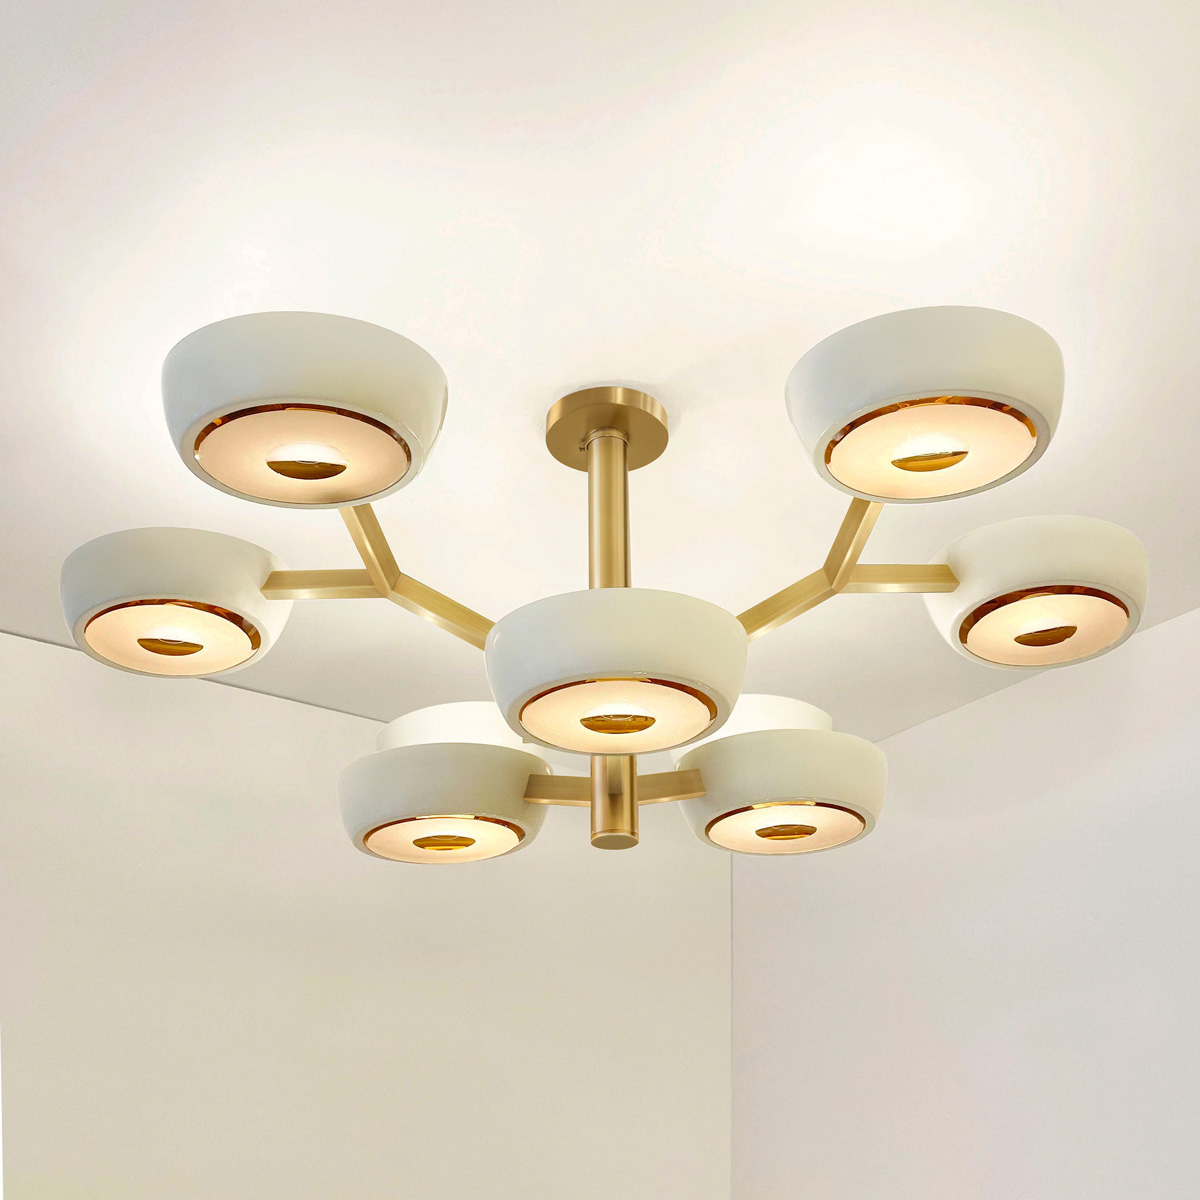 Rose Ceiling Light by Gaspare Asaro